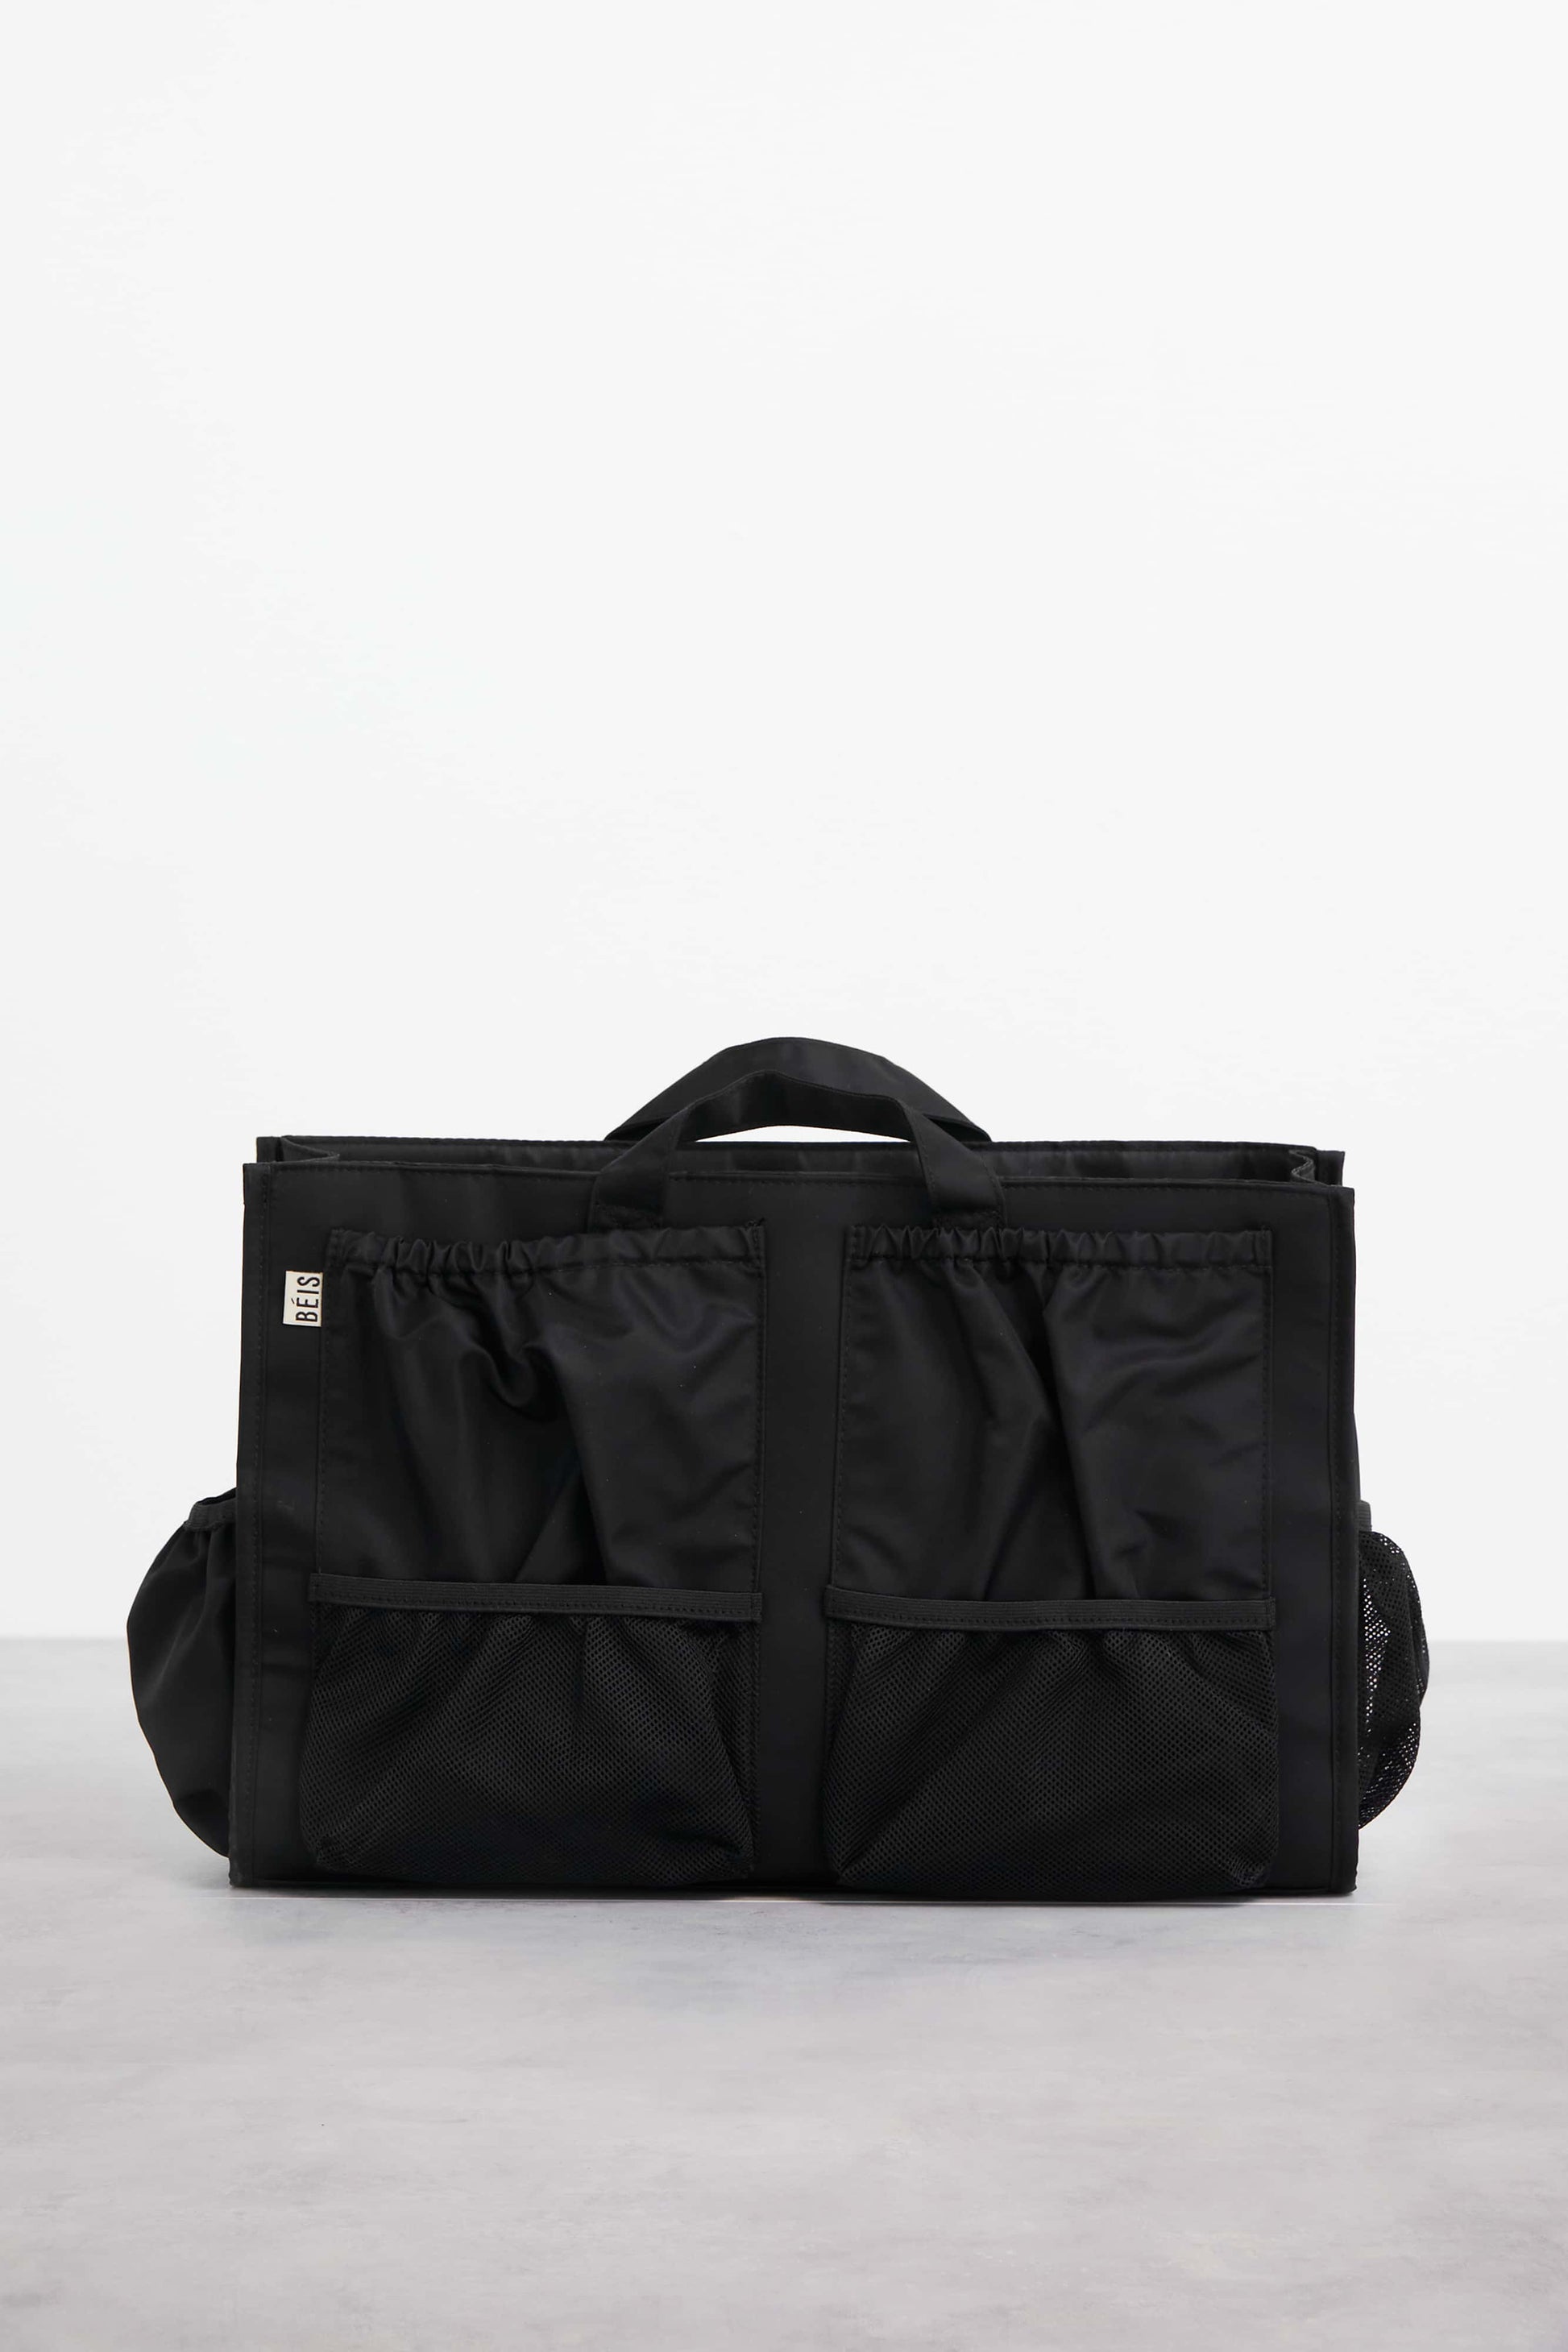 Tote Insert Black Front